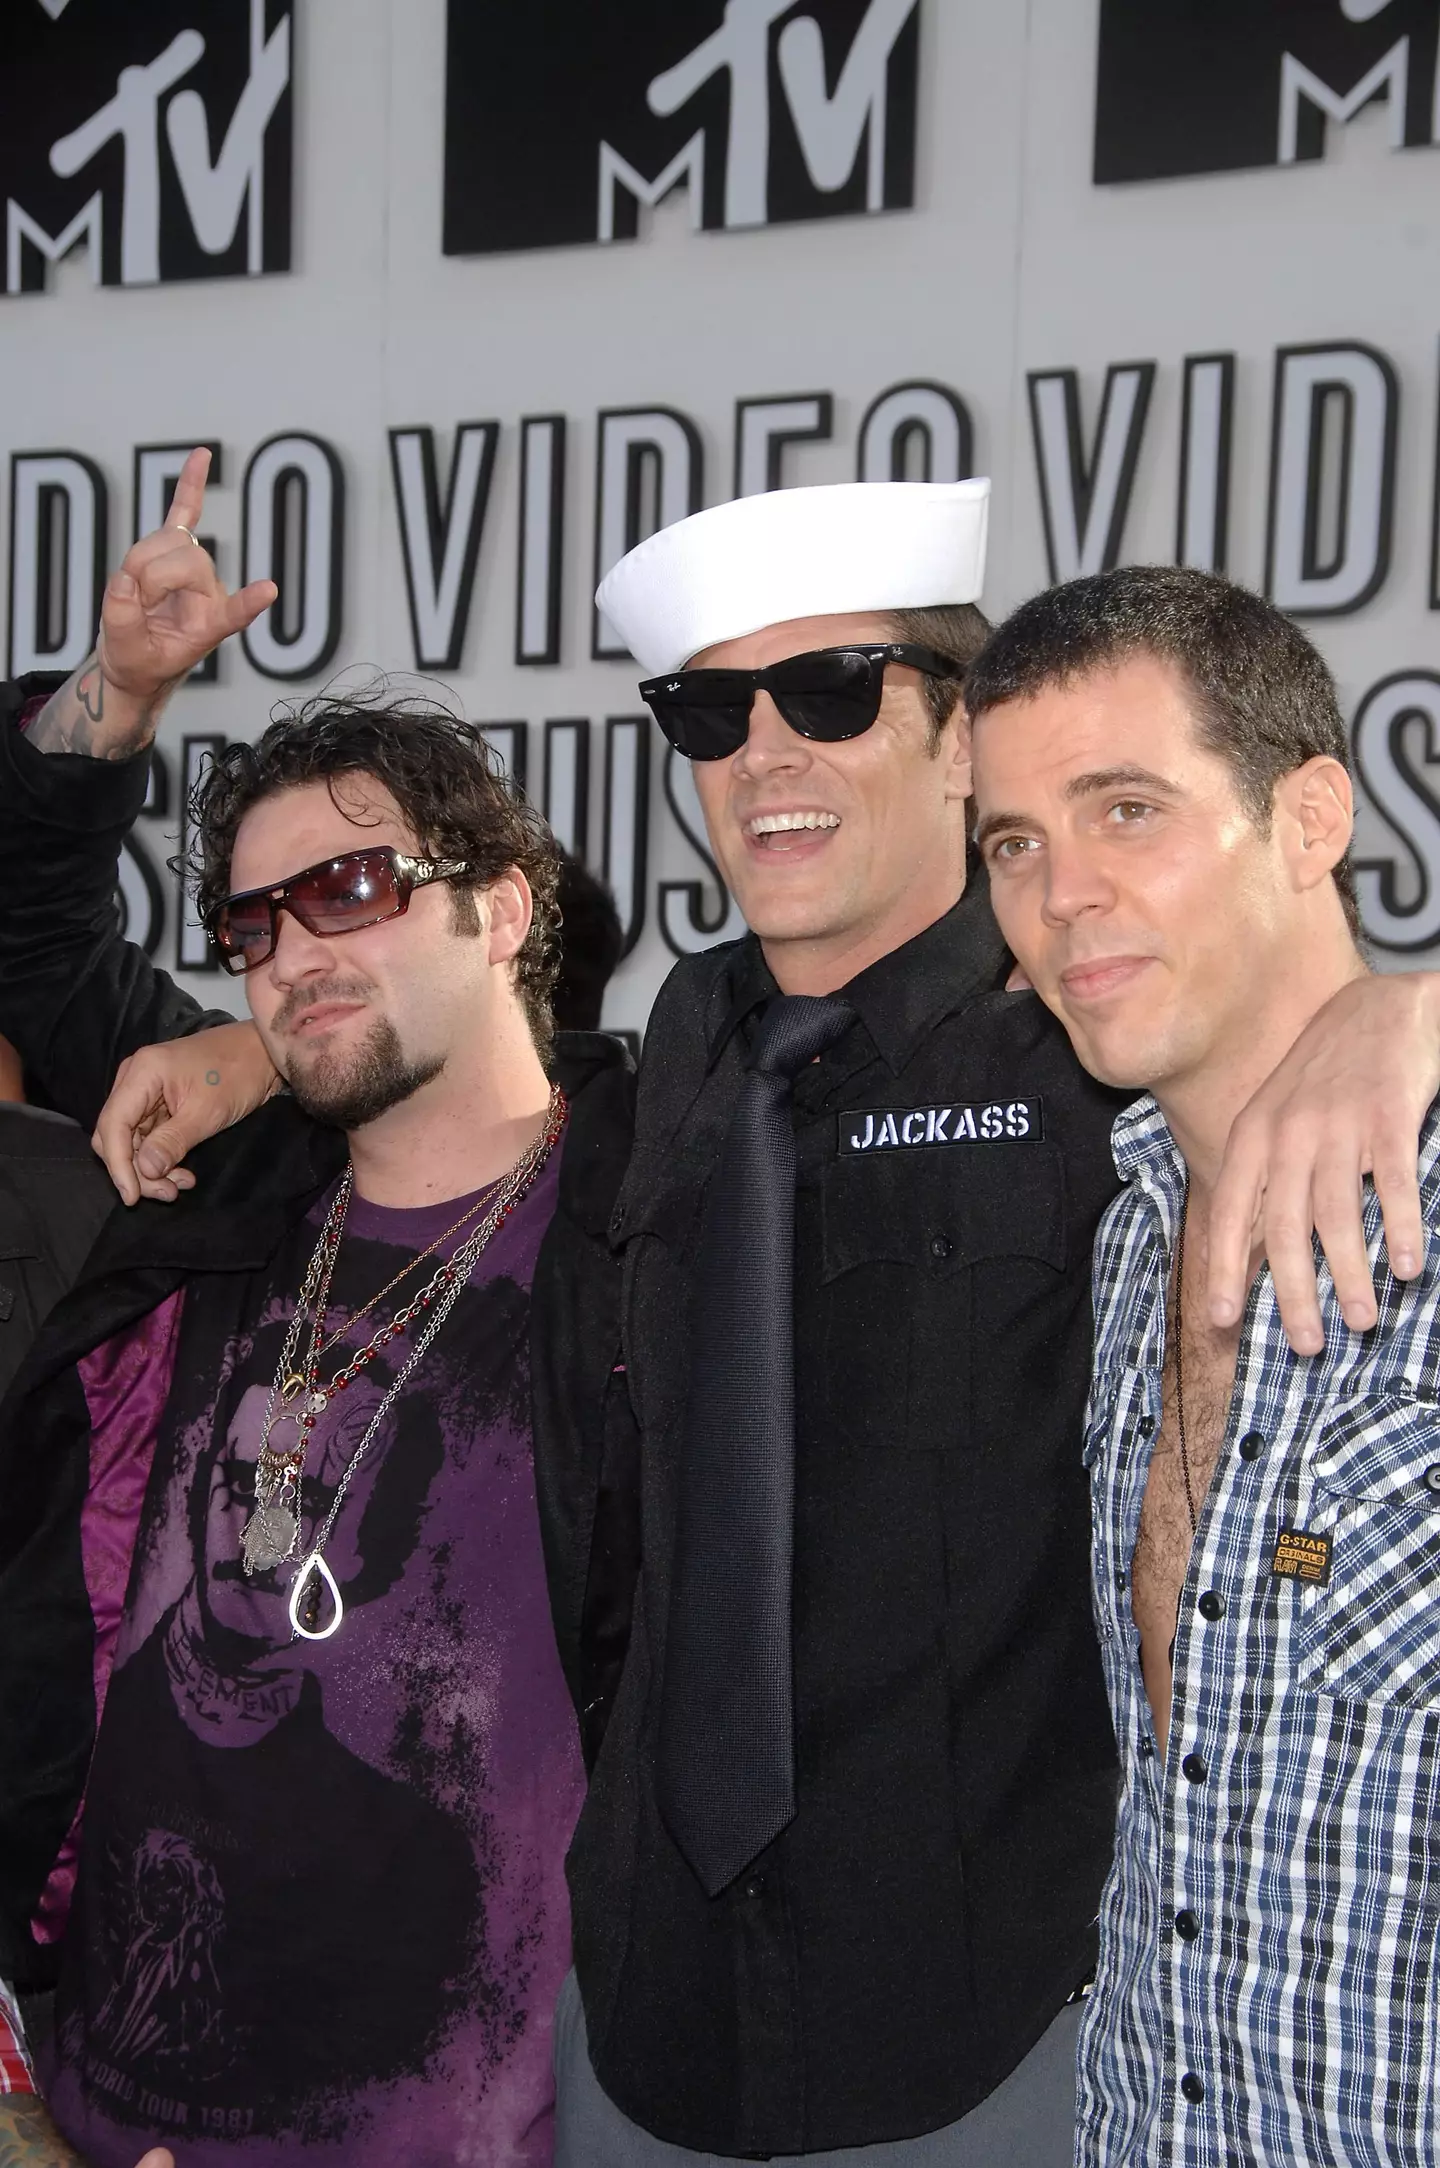 Bam Margera hit out at Johnny Knoxville for being a 'poser'.